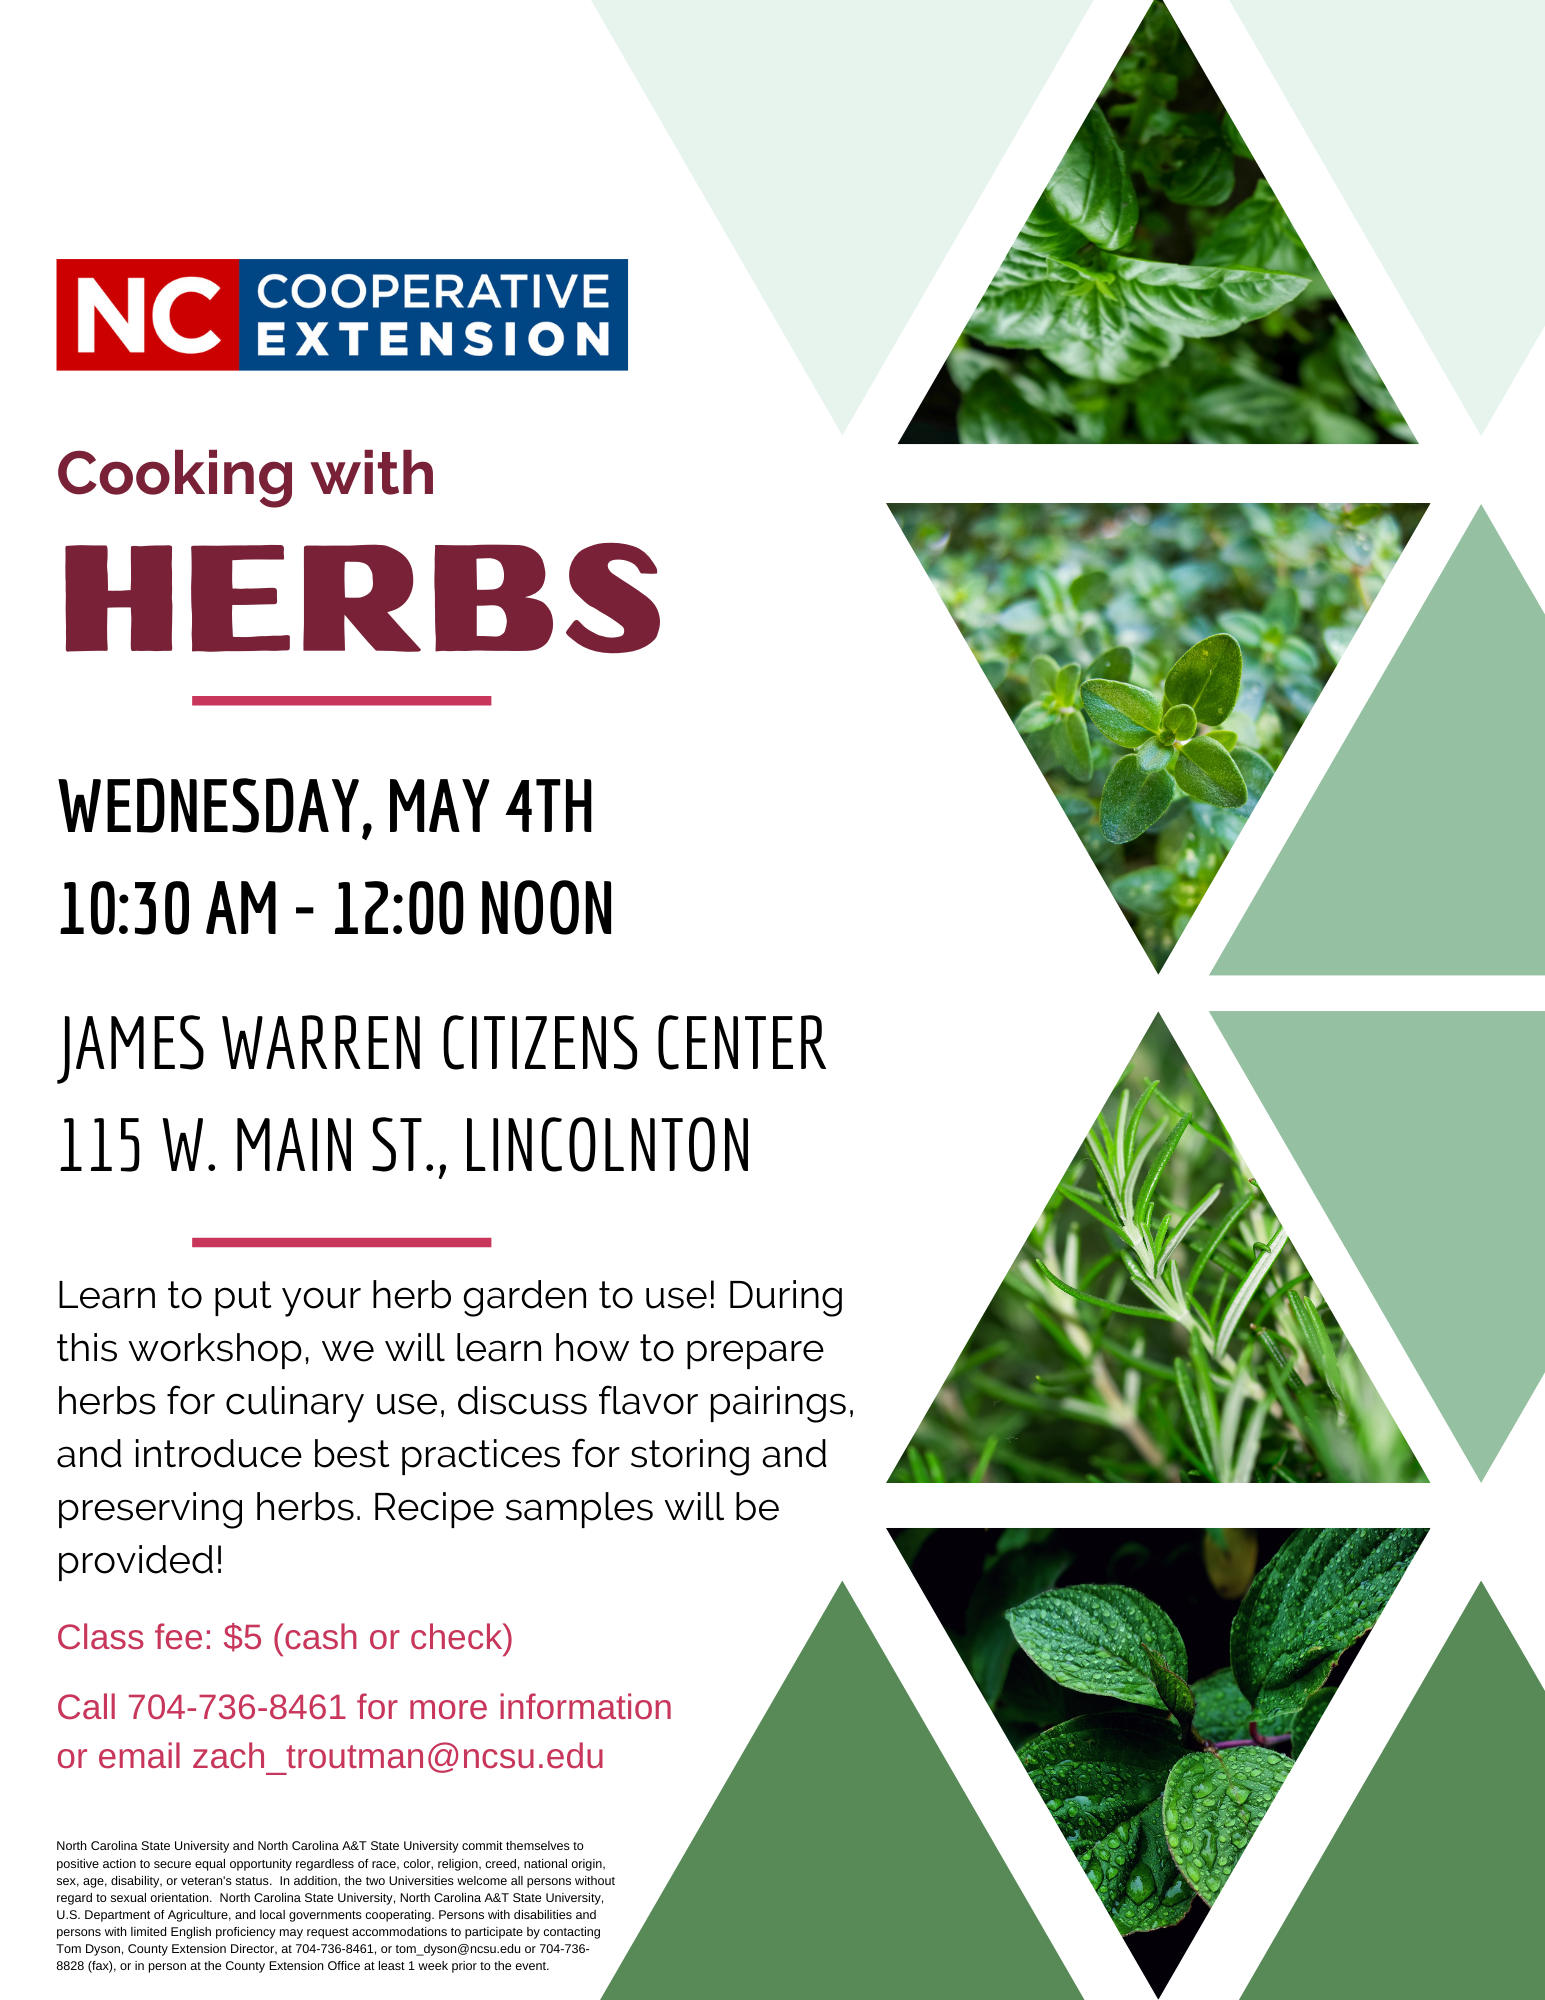 Cooking with Herbs, Wednesday, May 4th, 10:30 a.m. - 12:00 noon. James Warren Citizens Center 115 W. Main St., Lincolnton NC. Learn to put your herb garden to use! During this workshop, we will learn how to prepare herbs for culinary use, discuss flavor pairings, and introduce best practices for storing and preserving herbs. Recipe samples will be provided!